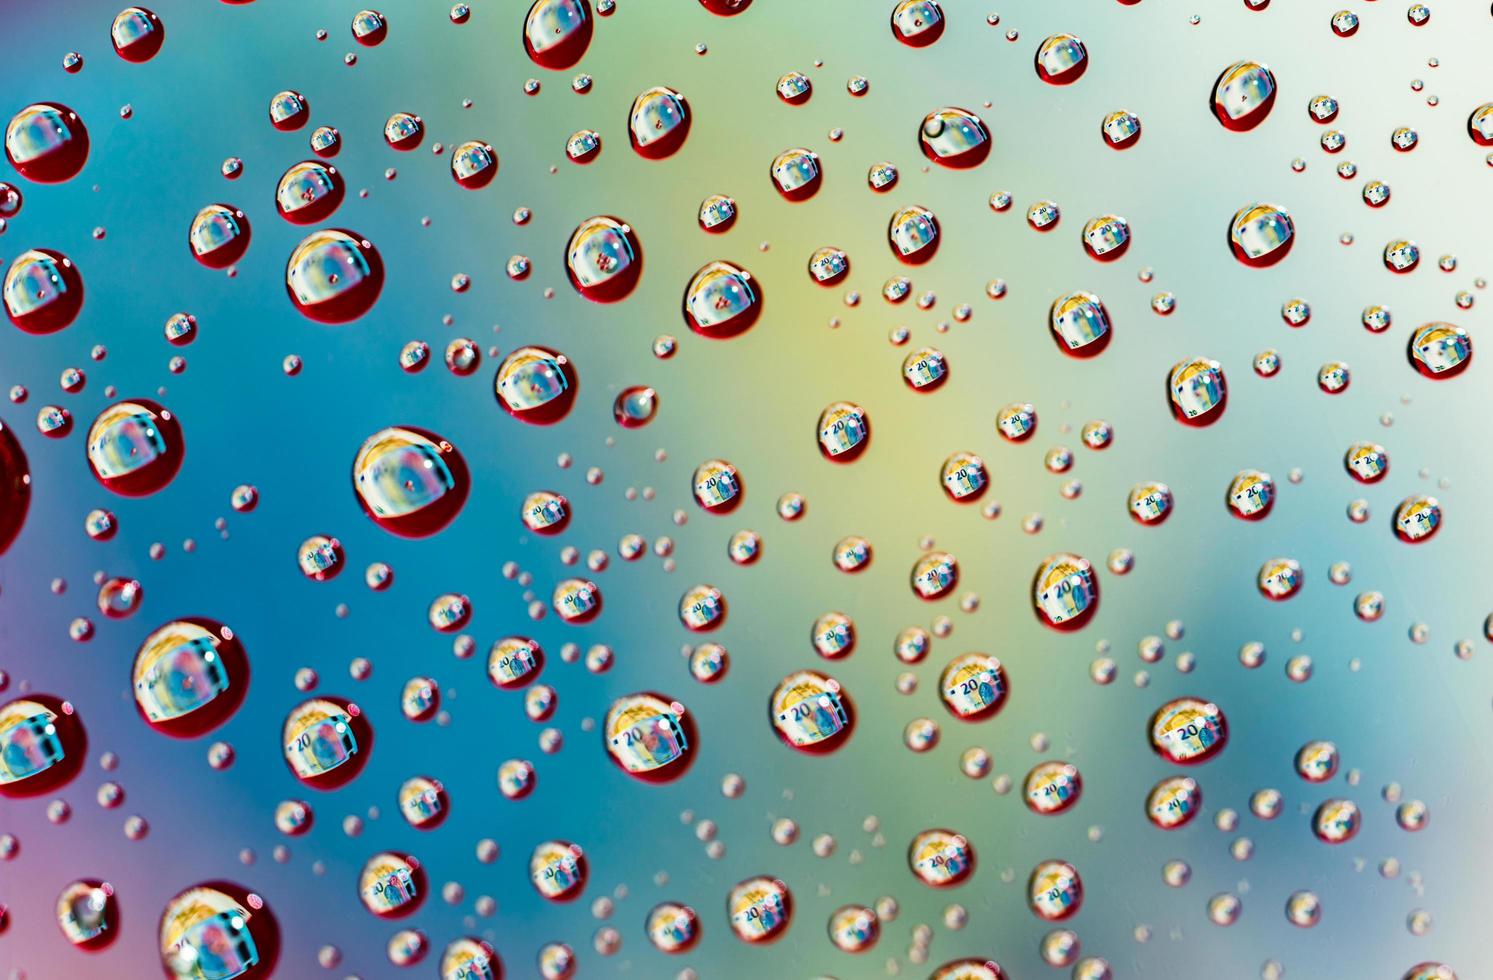 Macro shot detail reflection of 20 Euro banknote in water drops. Colorful water drops background photo